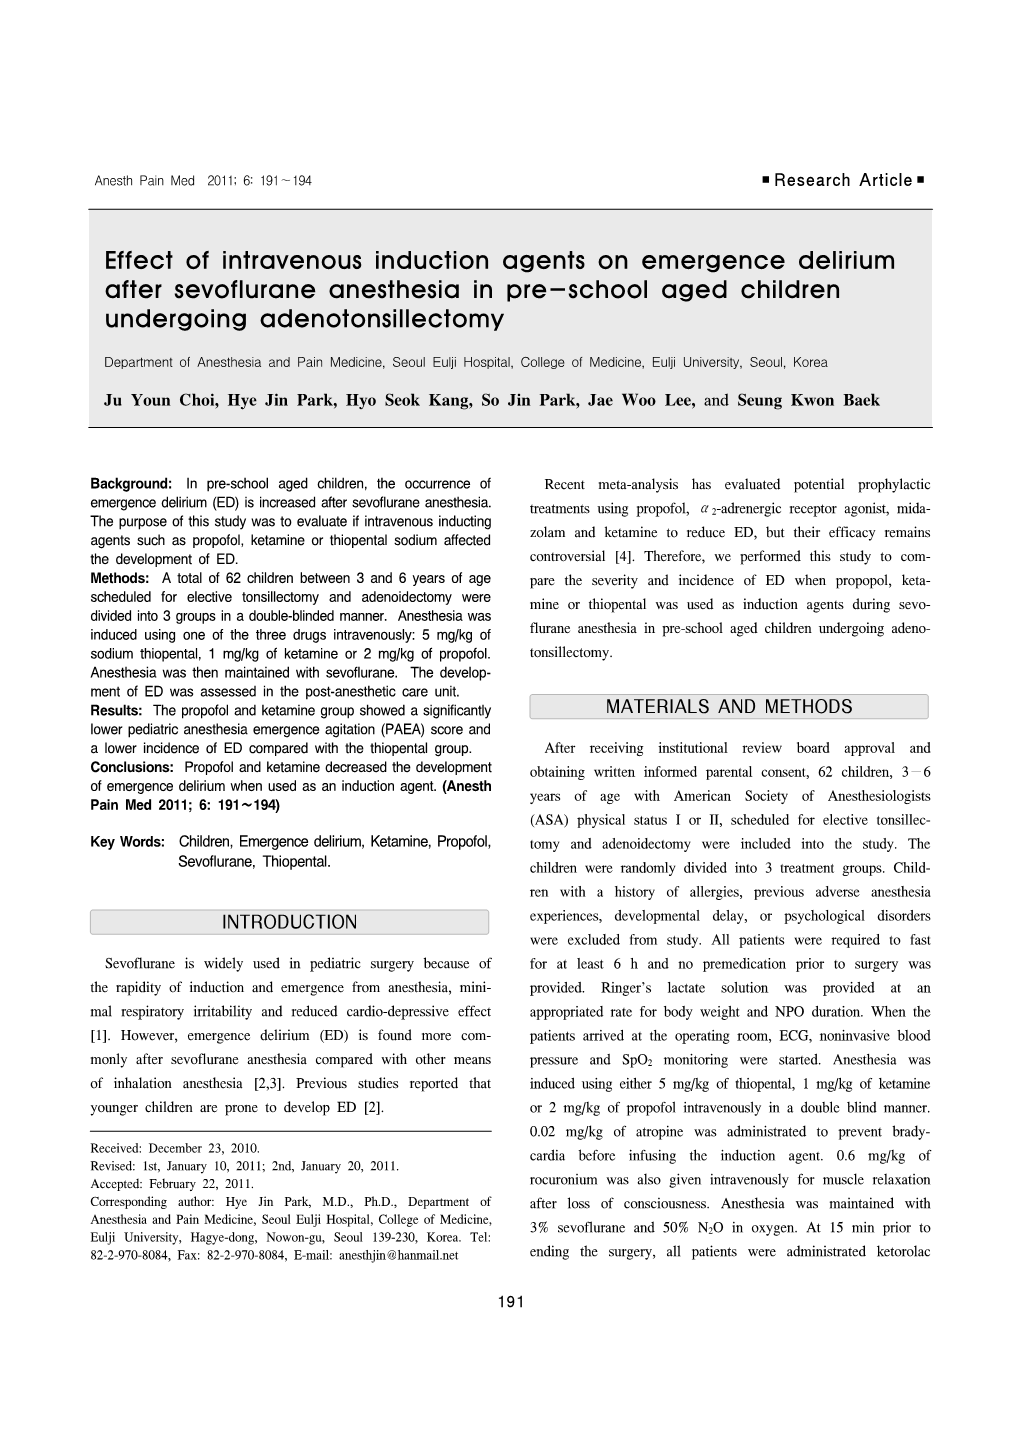 Effect of Intravenous Induction Agents on Emergence Delirium After Sevoflurane Anesthesia in Pre-School Aged Children Undergoing Adenotonsillectomy